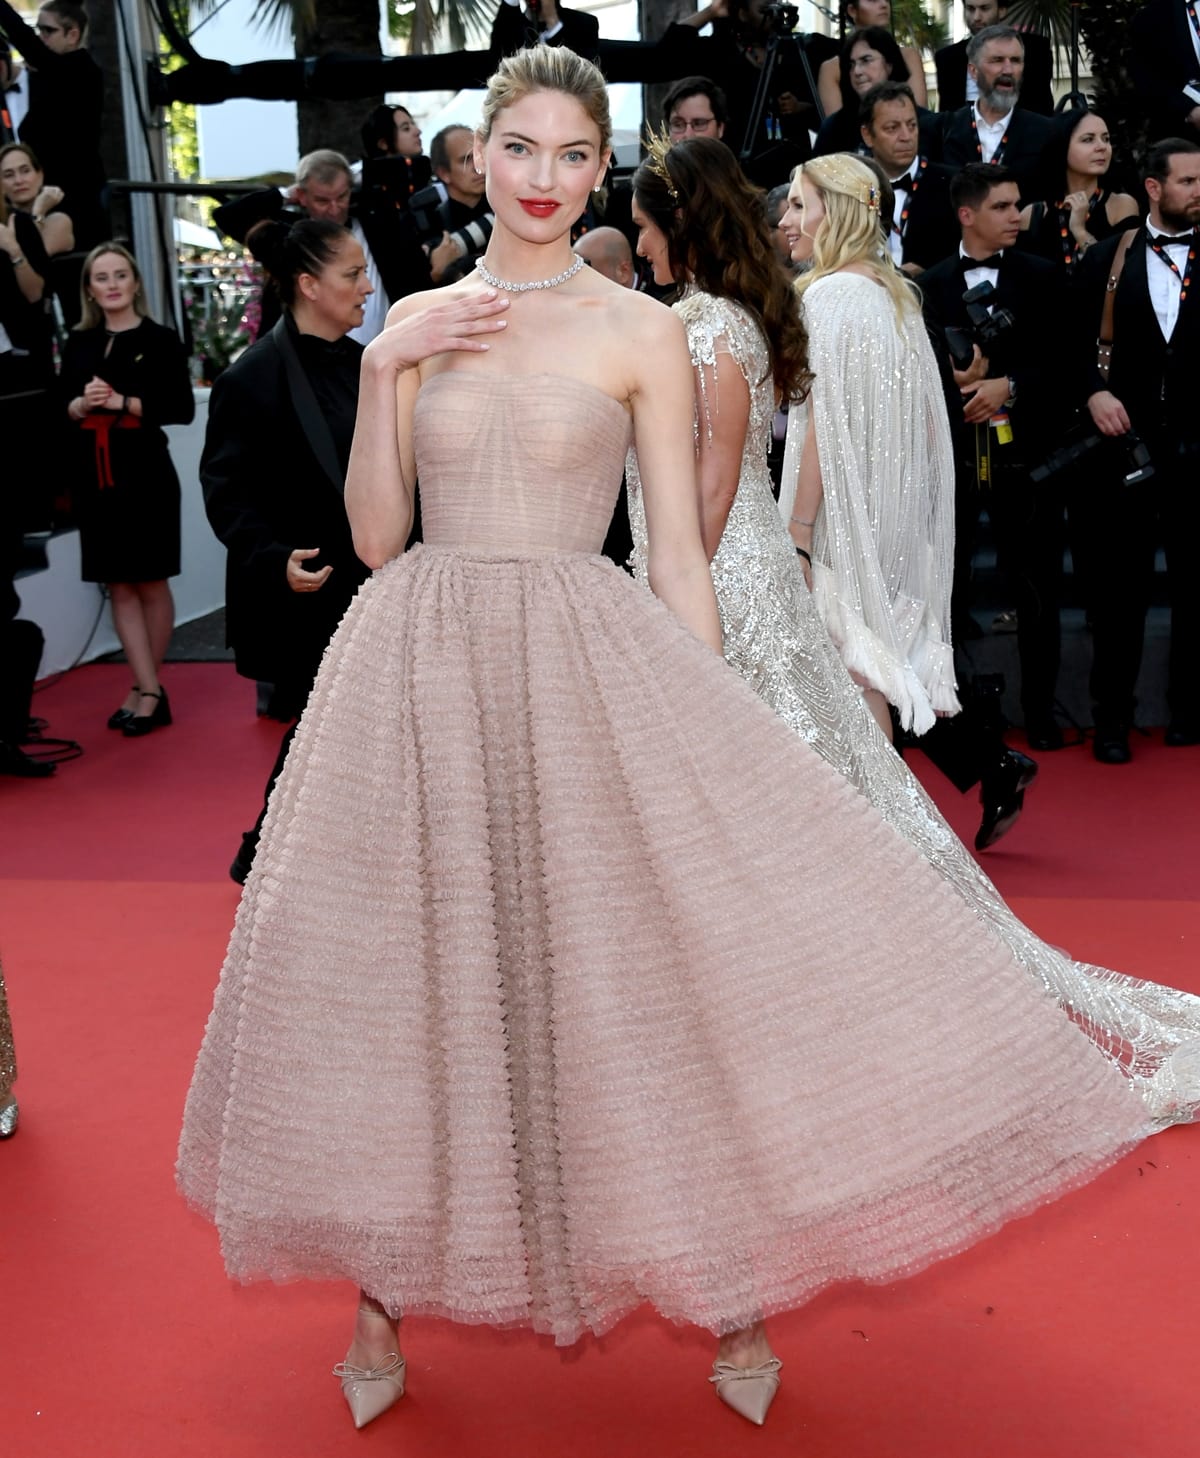 Masterfully styled by Emma Jade Morrison, Martha Hunt epitomized timeless elegance in a delicately textured, peach strapless gown by Jason Wu at the 